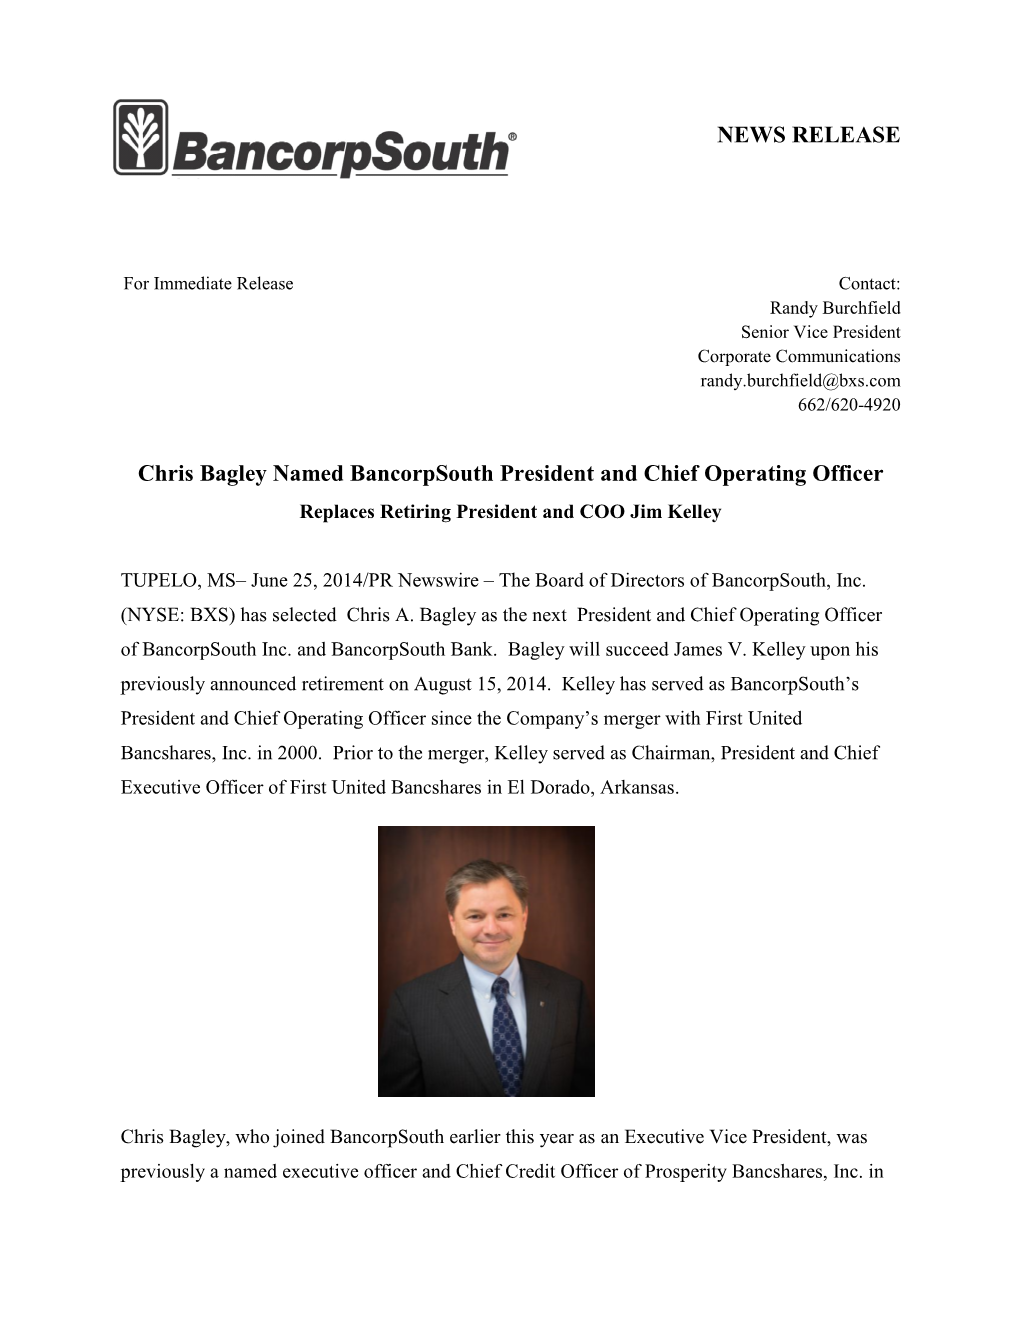 Chris Bagley Named Bancorpsouth President and Chief Operating Officer Replaces Retiring President and COO Jim Kelley